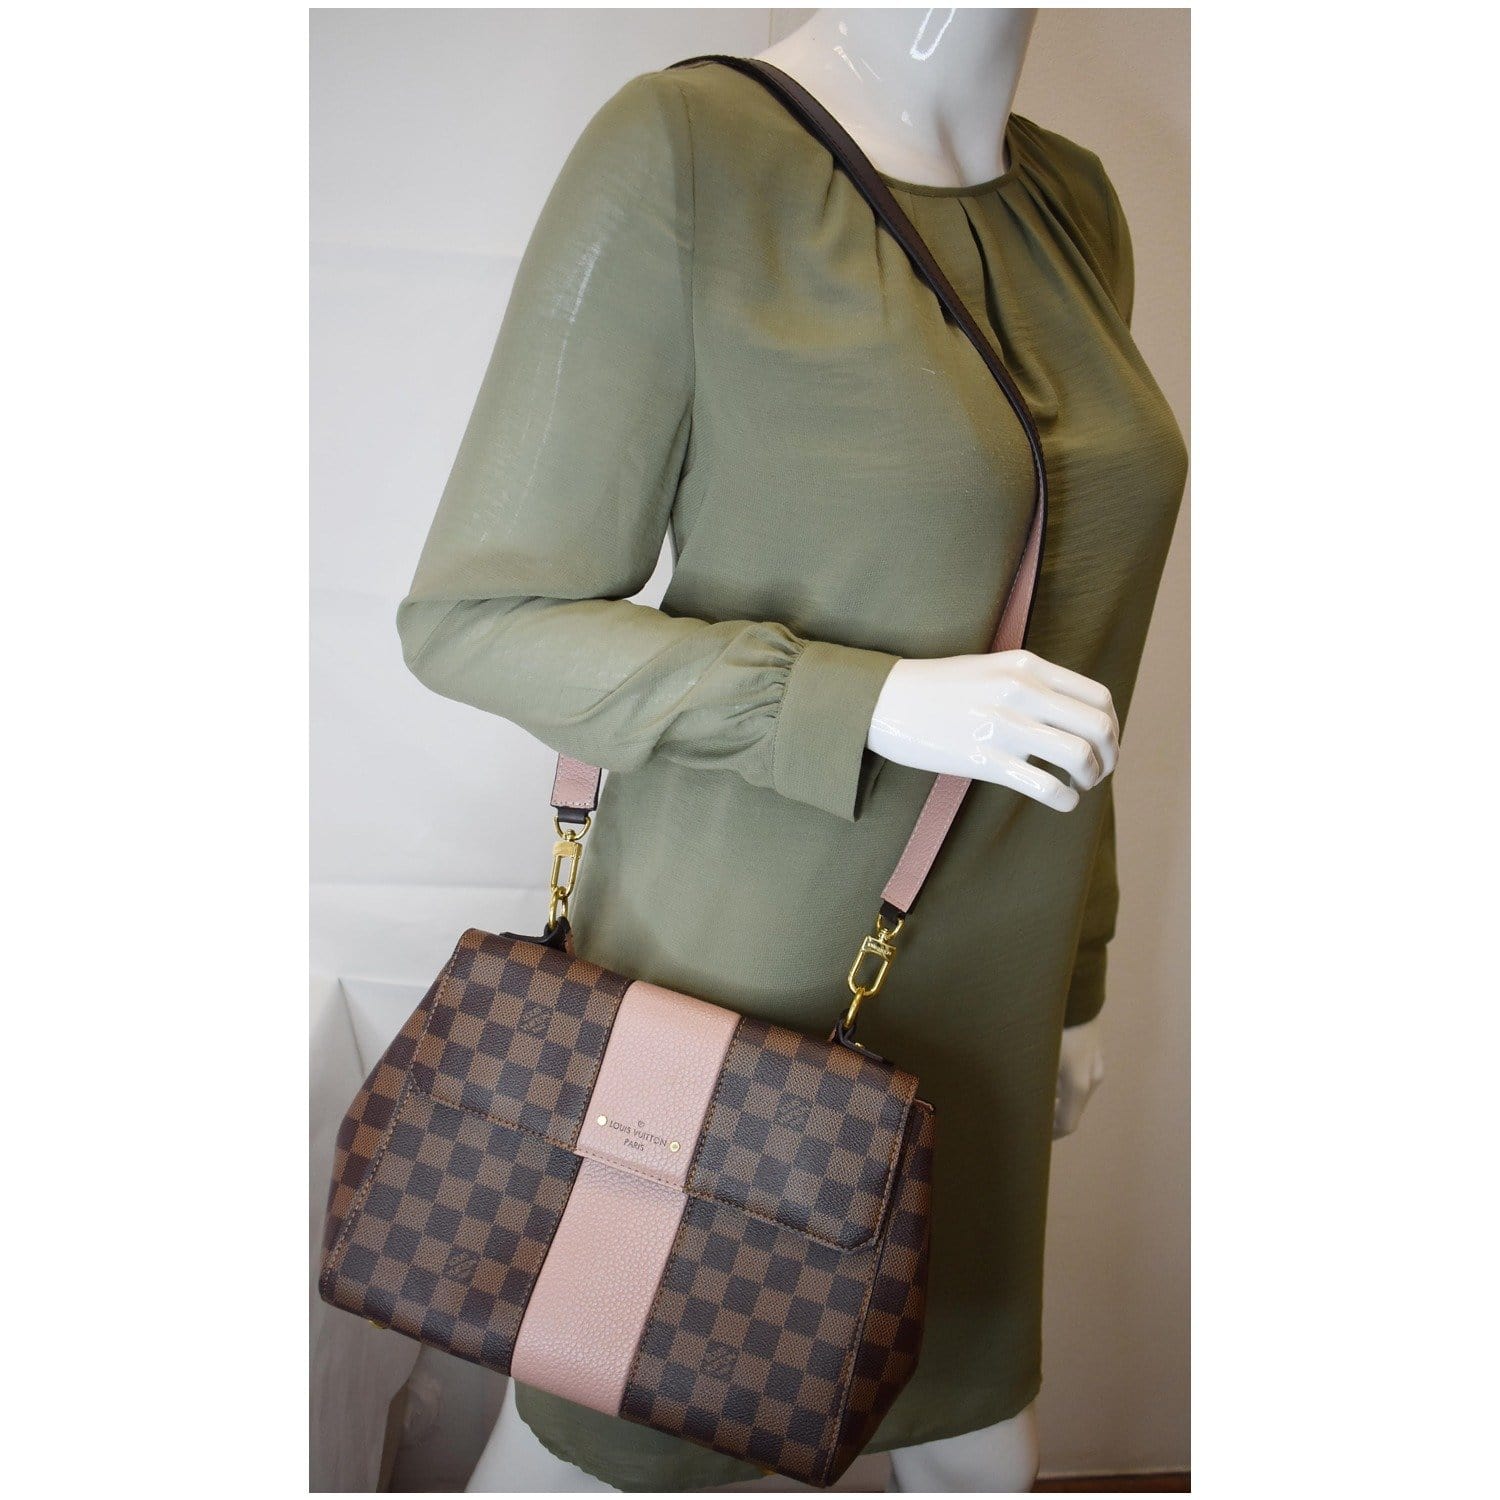 What's Best For You Louis Vuitton Alma Bb Damier Ebene Or Bond Street Bb  With Magnolia Leather? 